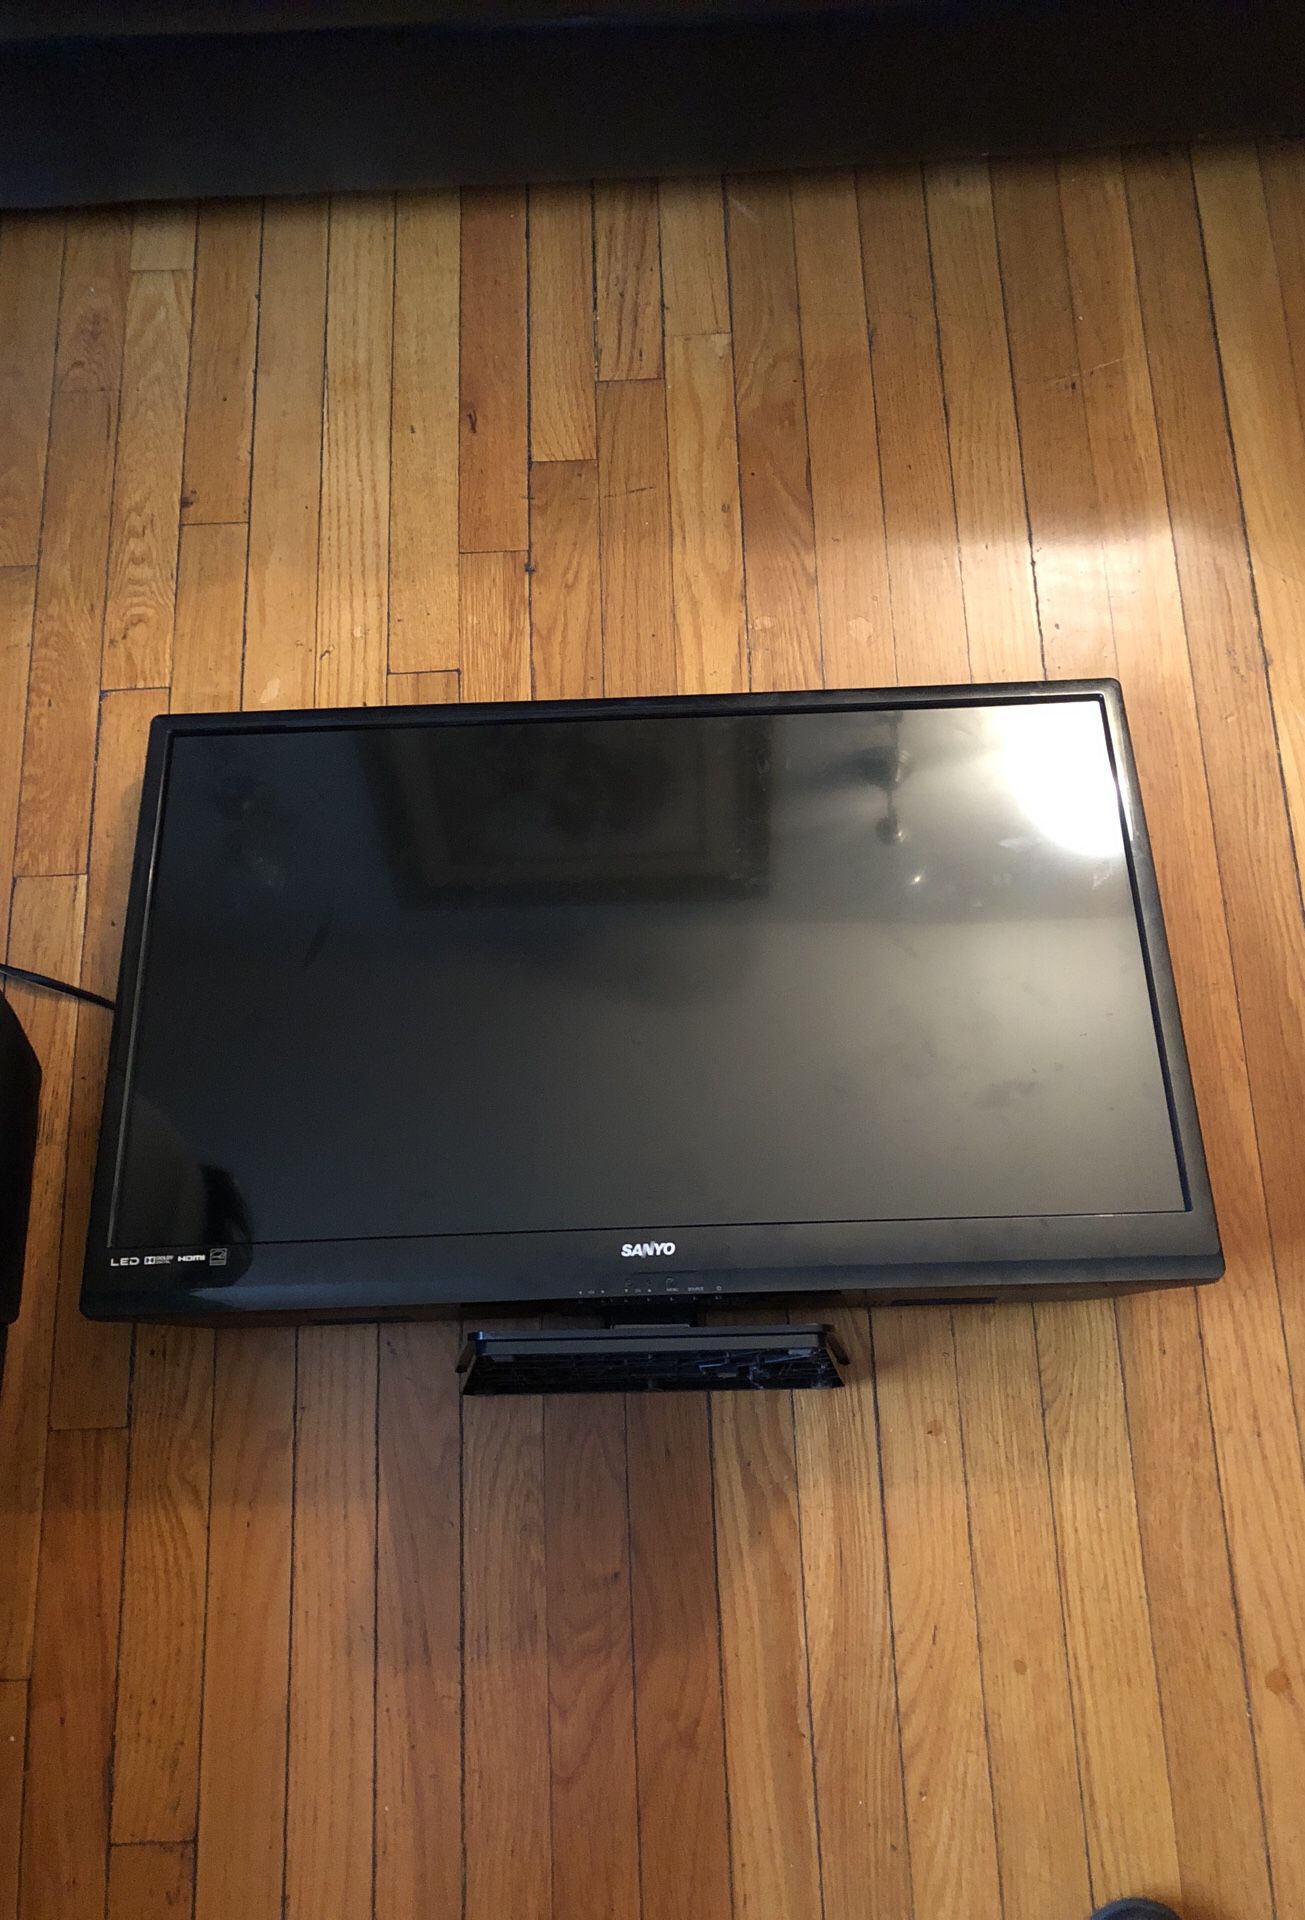 Used Sanyo TV no remote included perfectly working condition